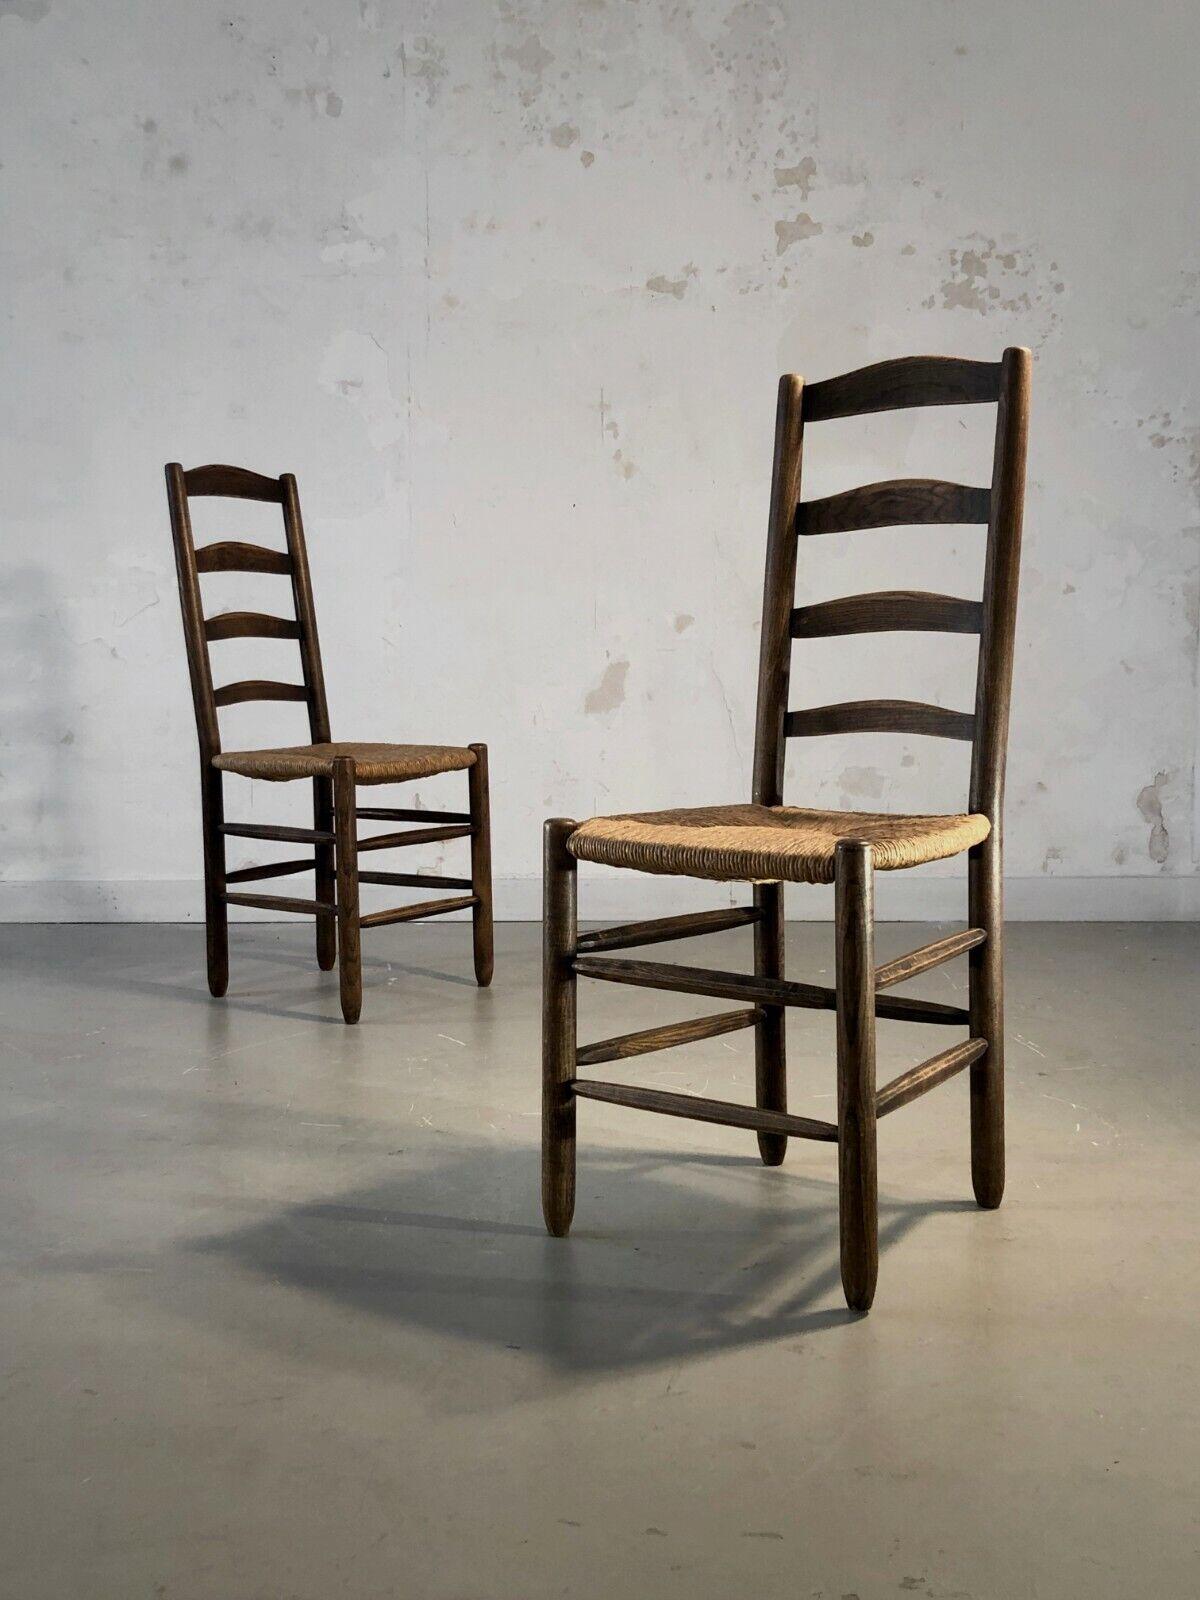 A beautiful pair of 2 chairs with high backs, Modernist, Rustic-Modern, Art-Popular, hand-cut tapered wooden structures, straw seats, high backs, in the spirit of Charles Dudouyt, to be attributed, France 1950.

DIMENSIONS of each chair: H 100 x L